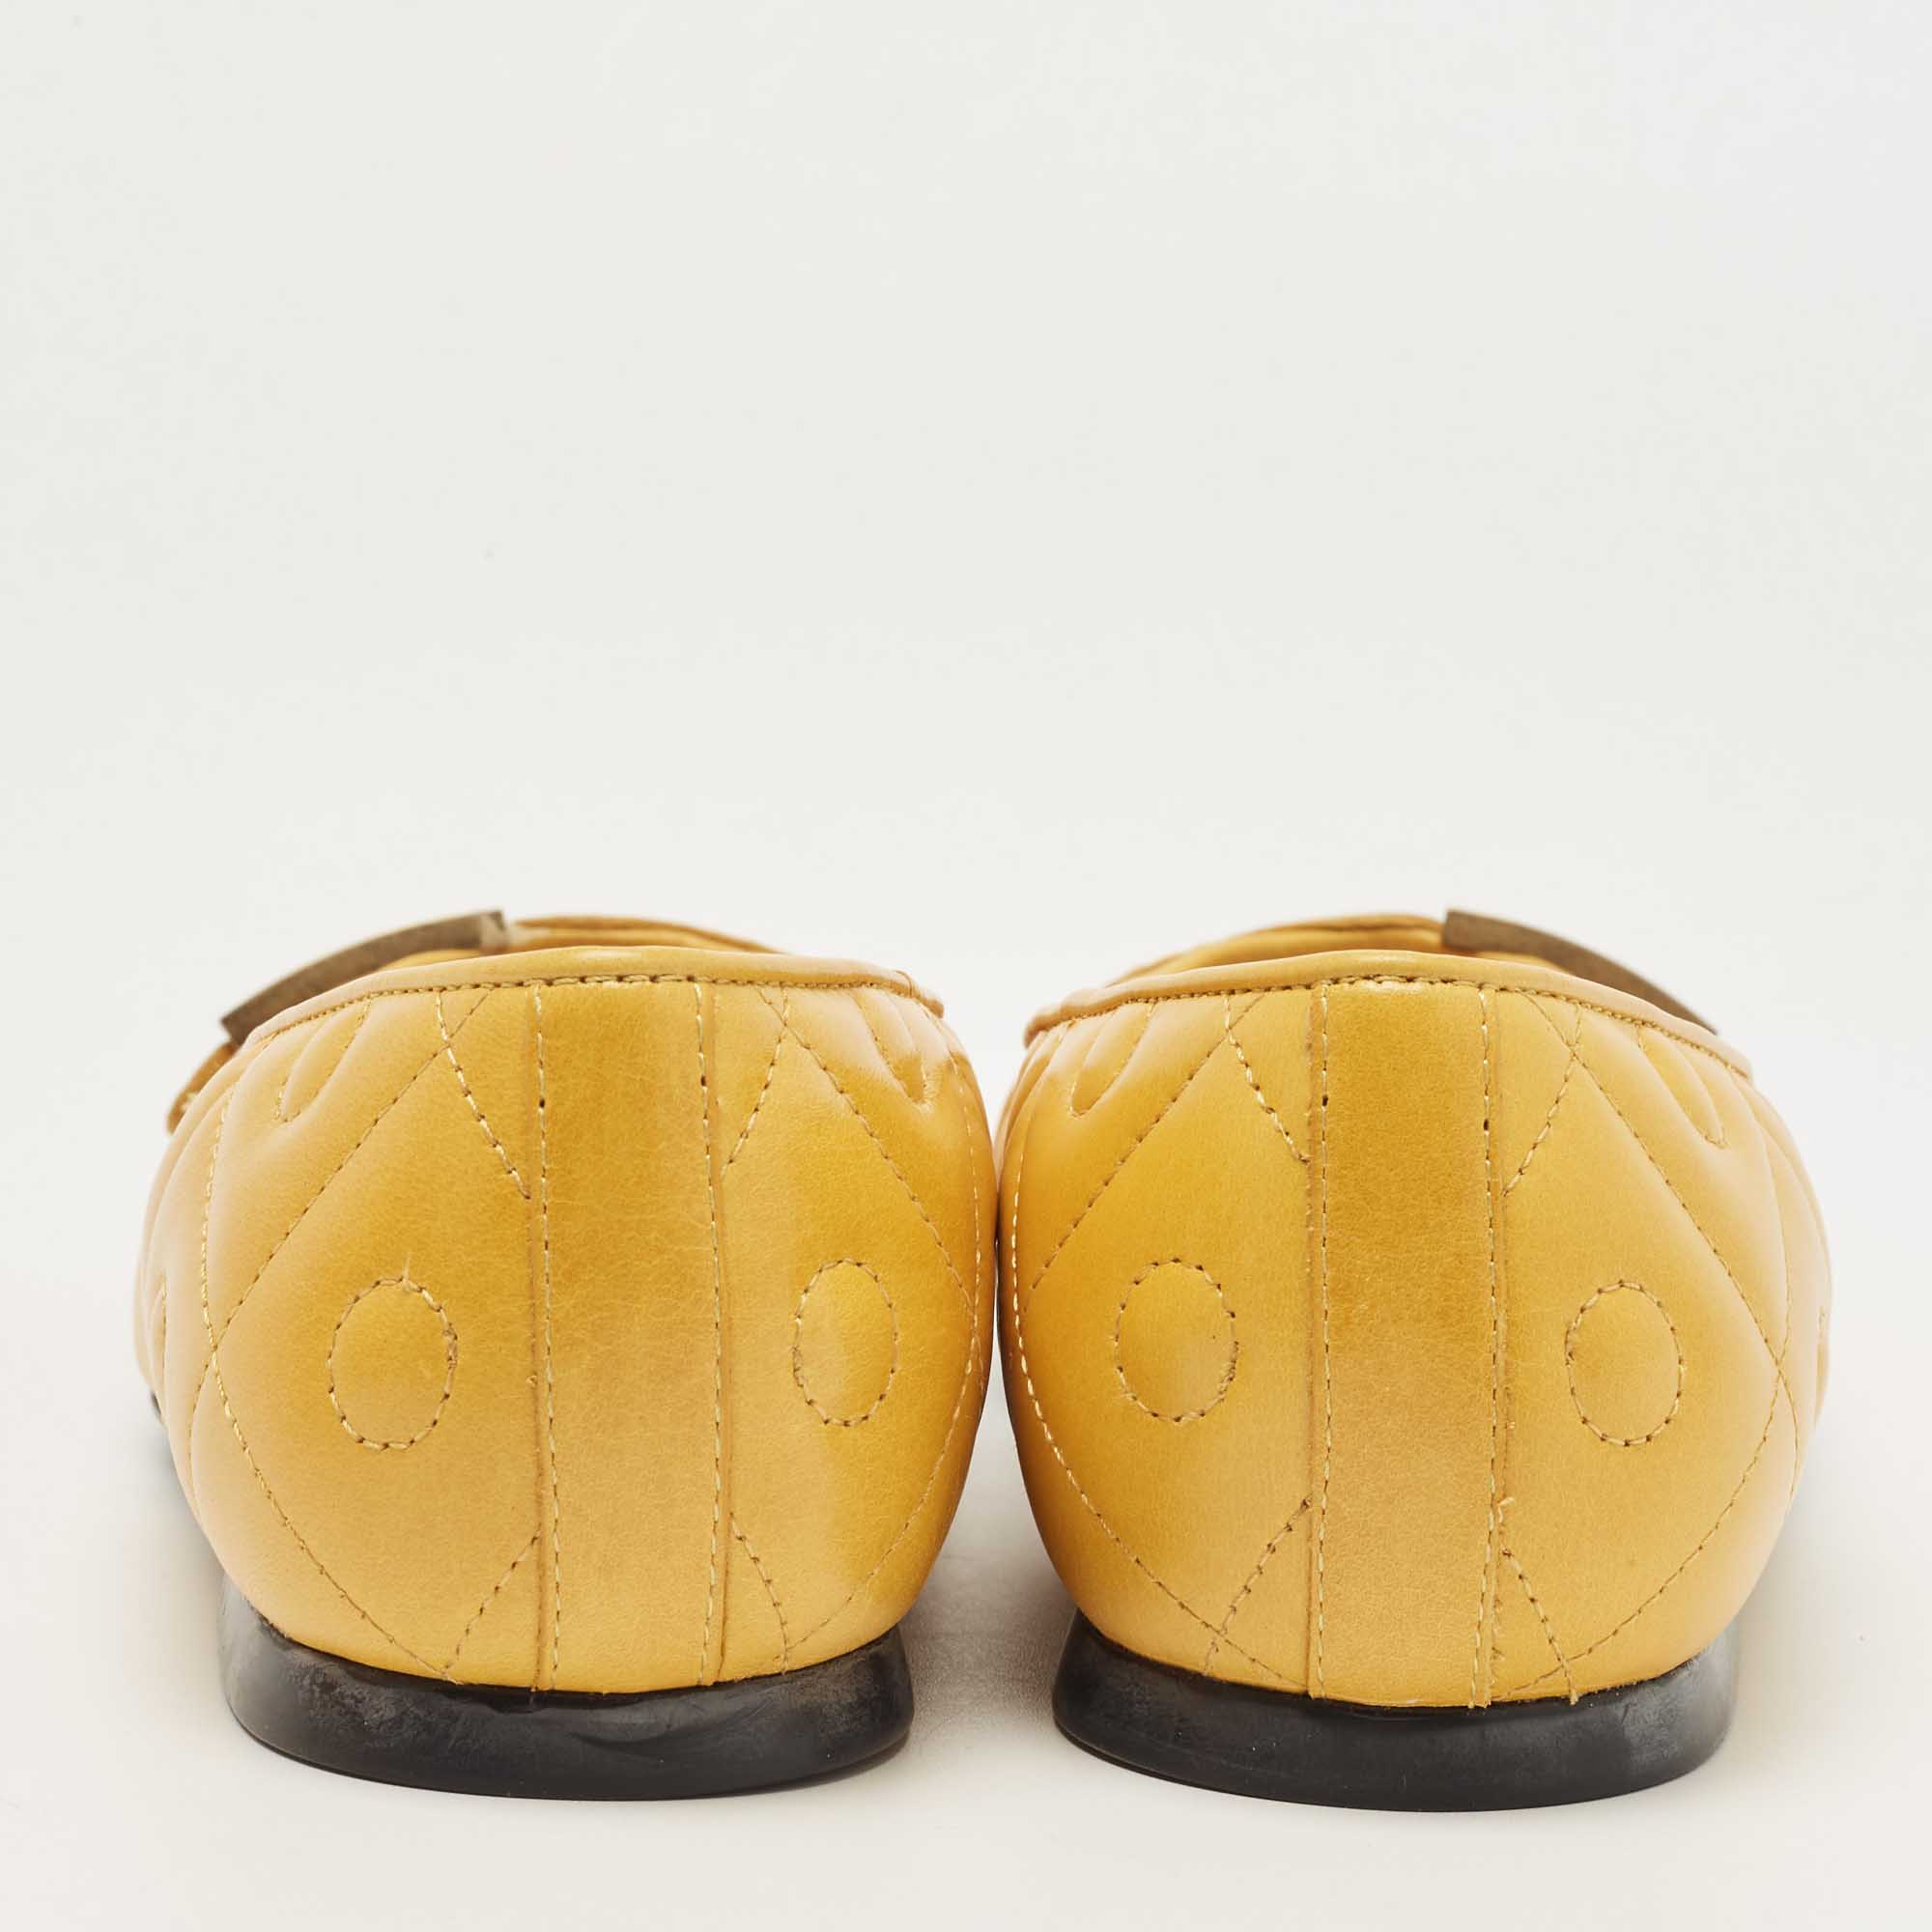 Tod's Yellow Quilted Leather T Ballet Flats Size 36.5